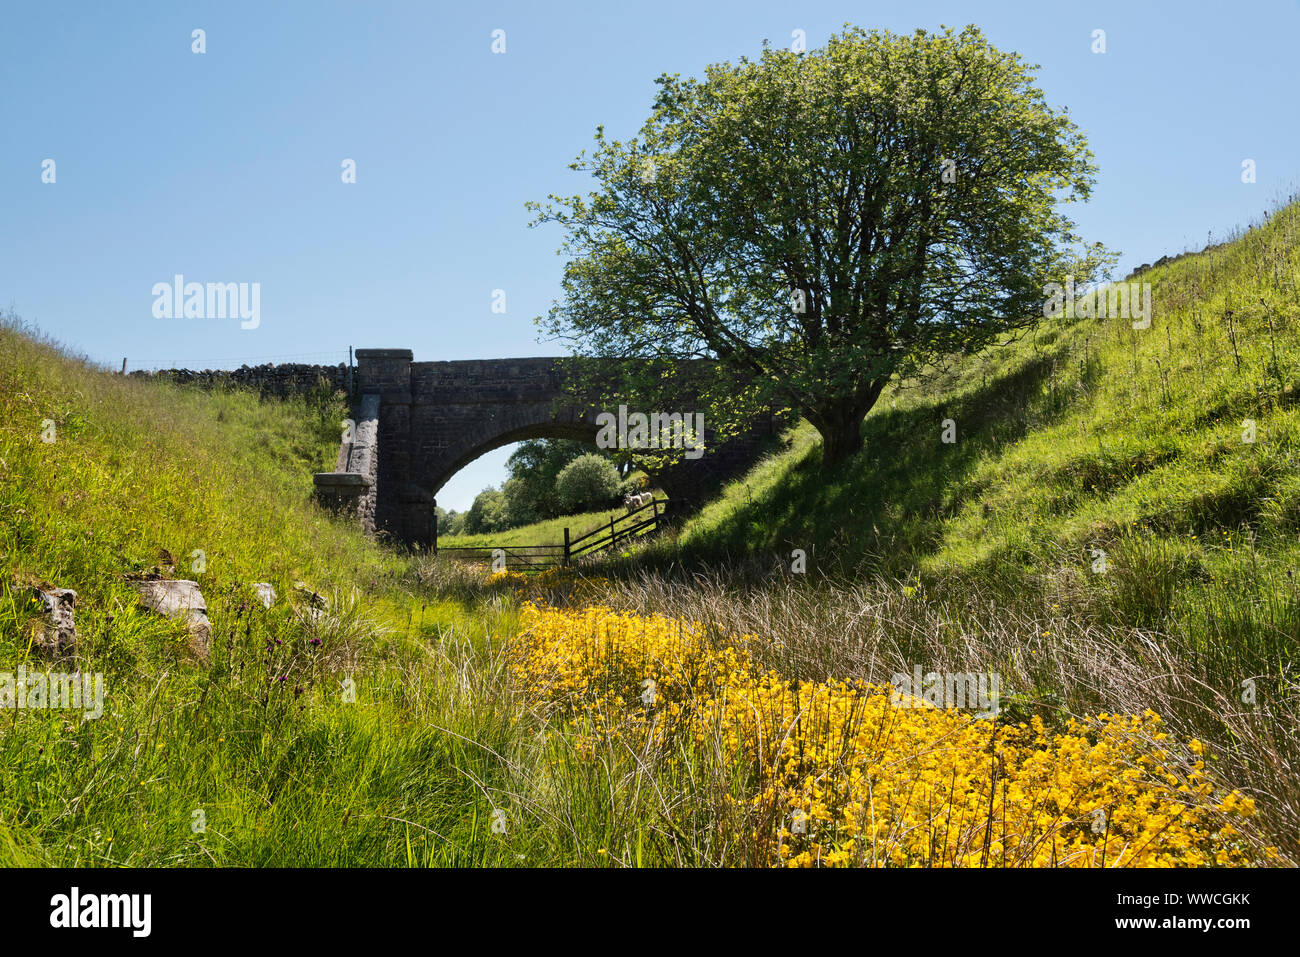 The track-bed of the disused Wensleydale railway line near Garsdale, Yorkshire Dales National Park, UK. Stock Photo